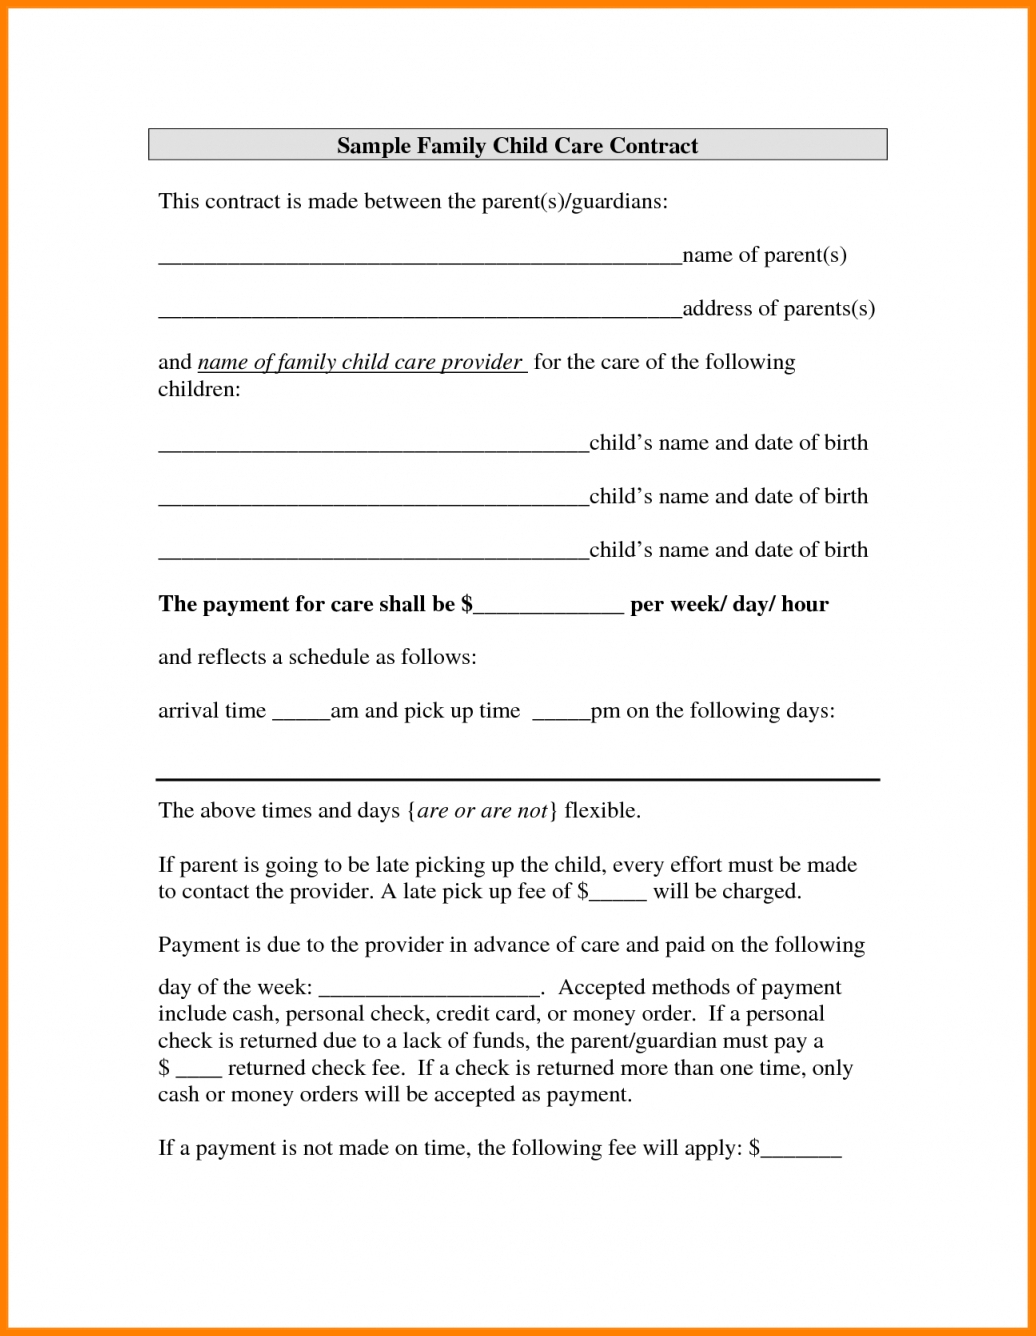 Parent Child Care Provider Agreement Child Care Agreement Between Parents 27571 10 Sample Daycare